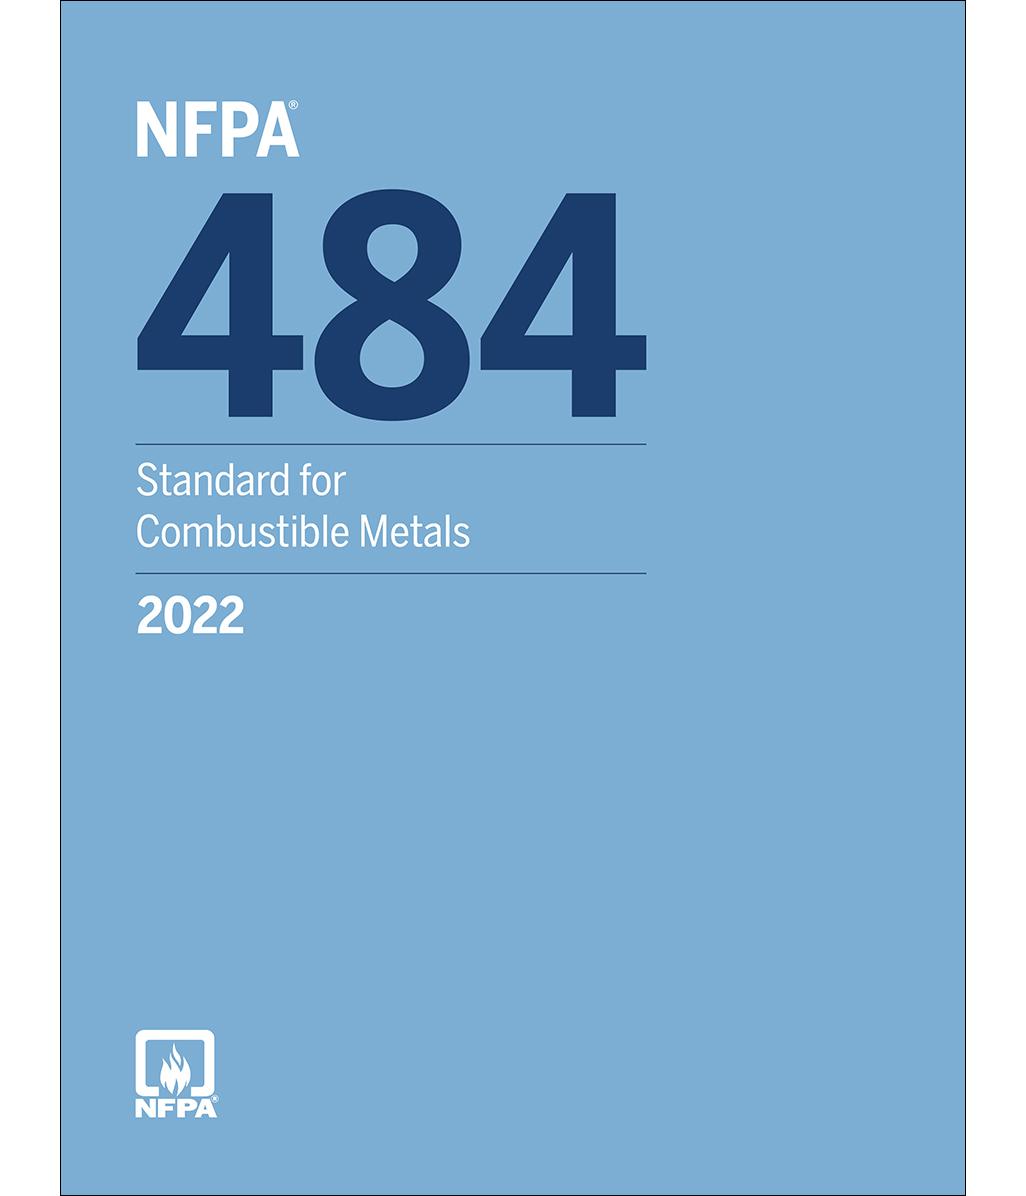 The NFPA 484 Standard for Combustible Metals